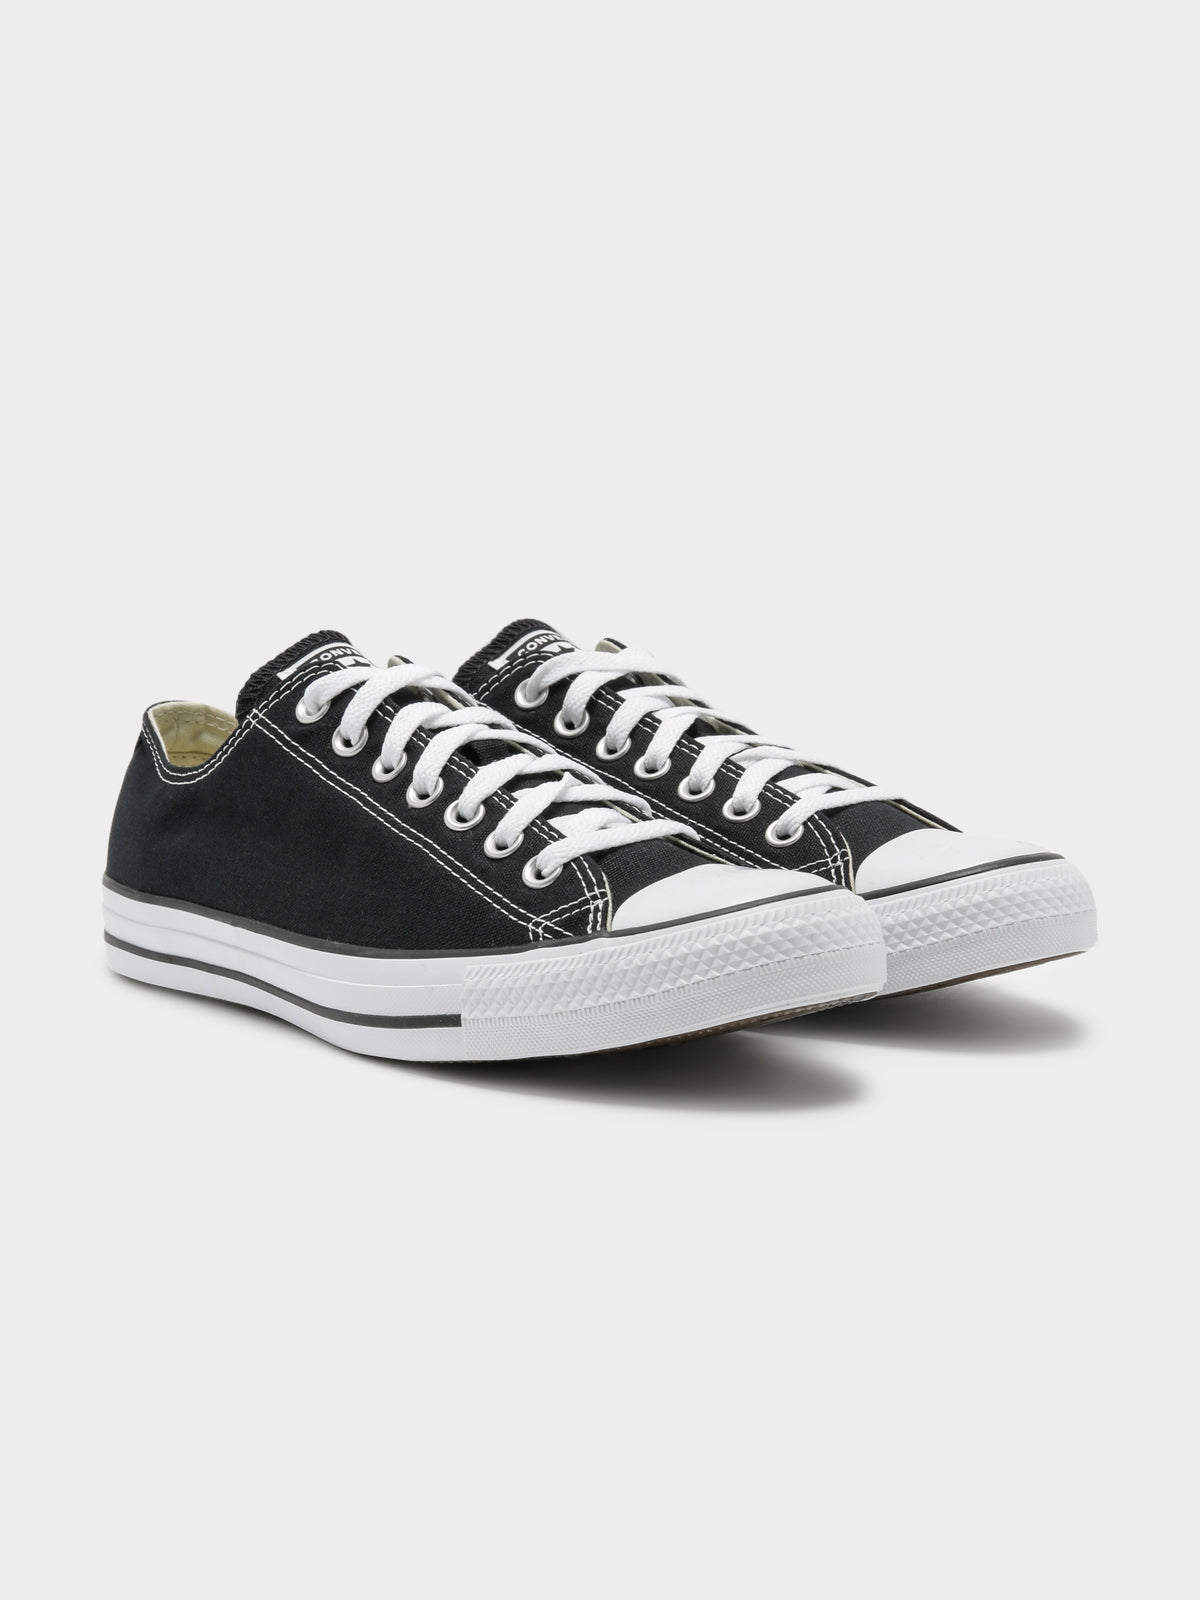 Unisex Chuck Taylor All Star Classic Low-Top Sneakers in Black